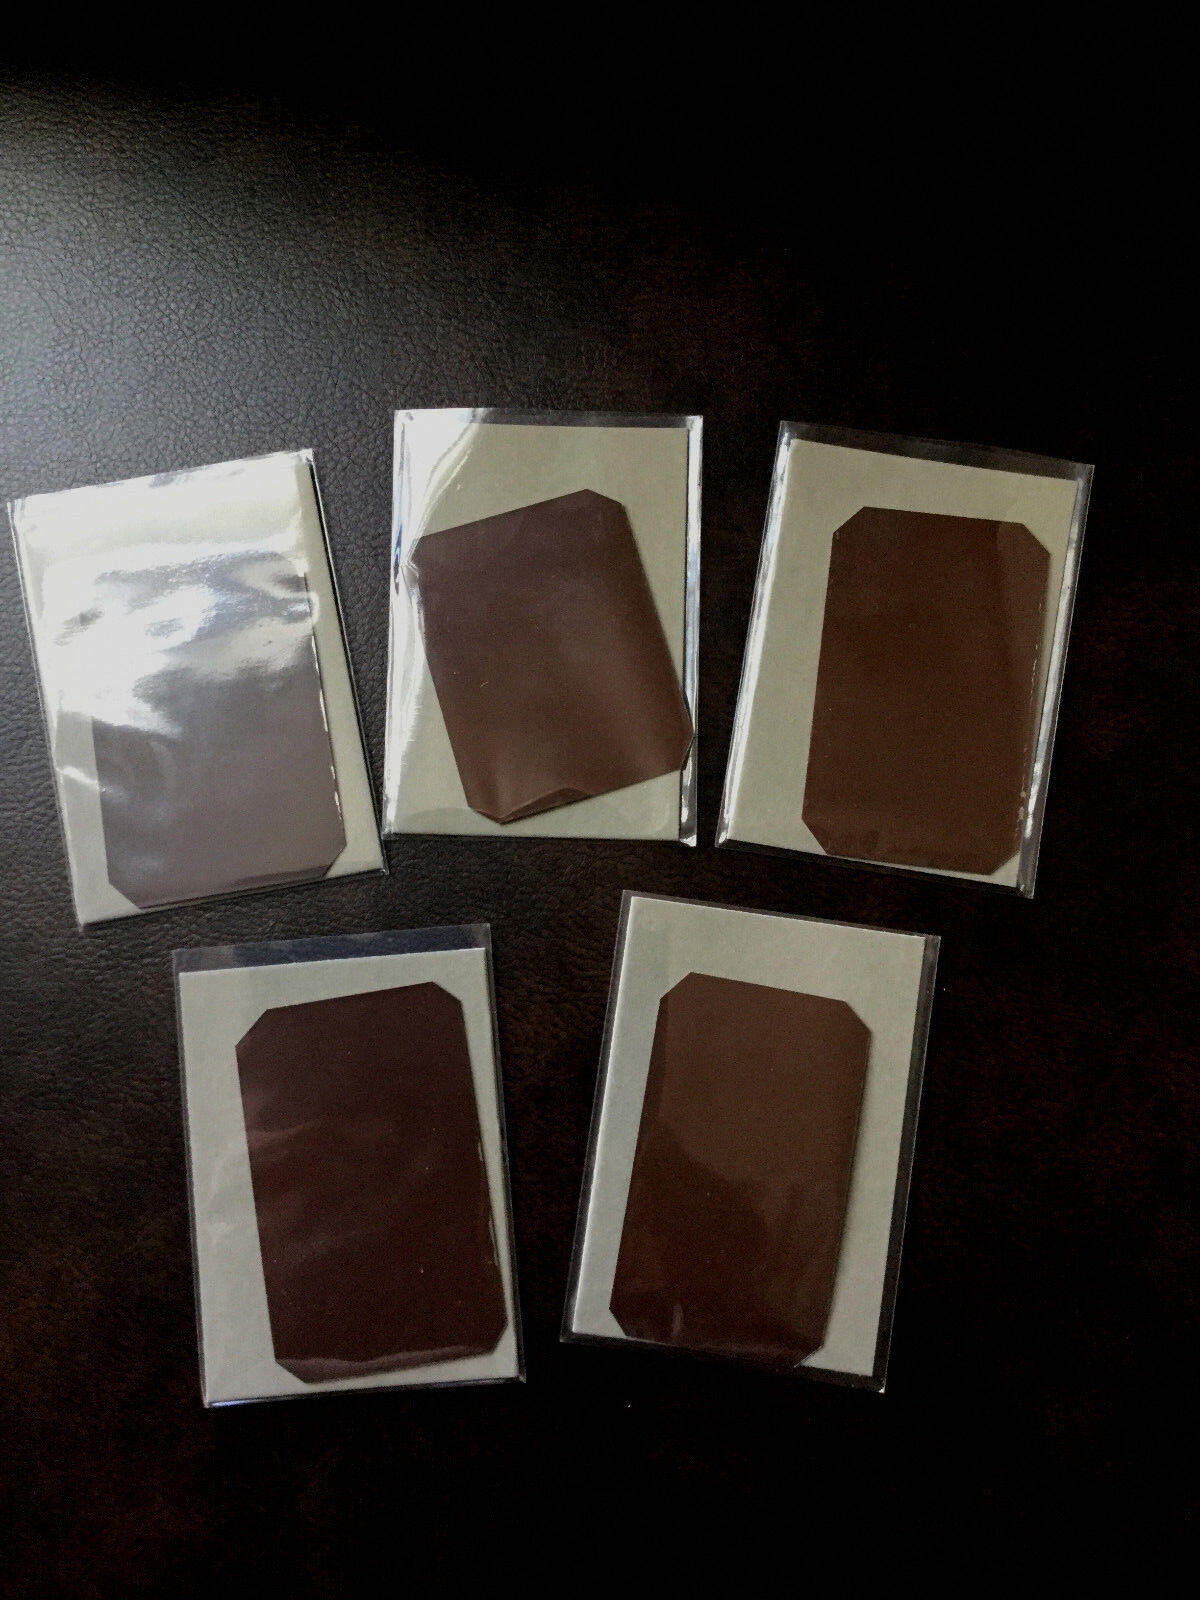 PACKAGE SPECIAL BUY  FIVE Sixth-Plate TINTYPES FROM OUR STORE FOR $62.50